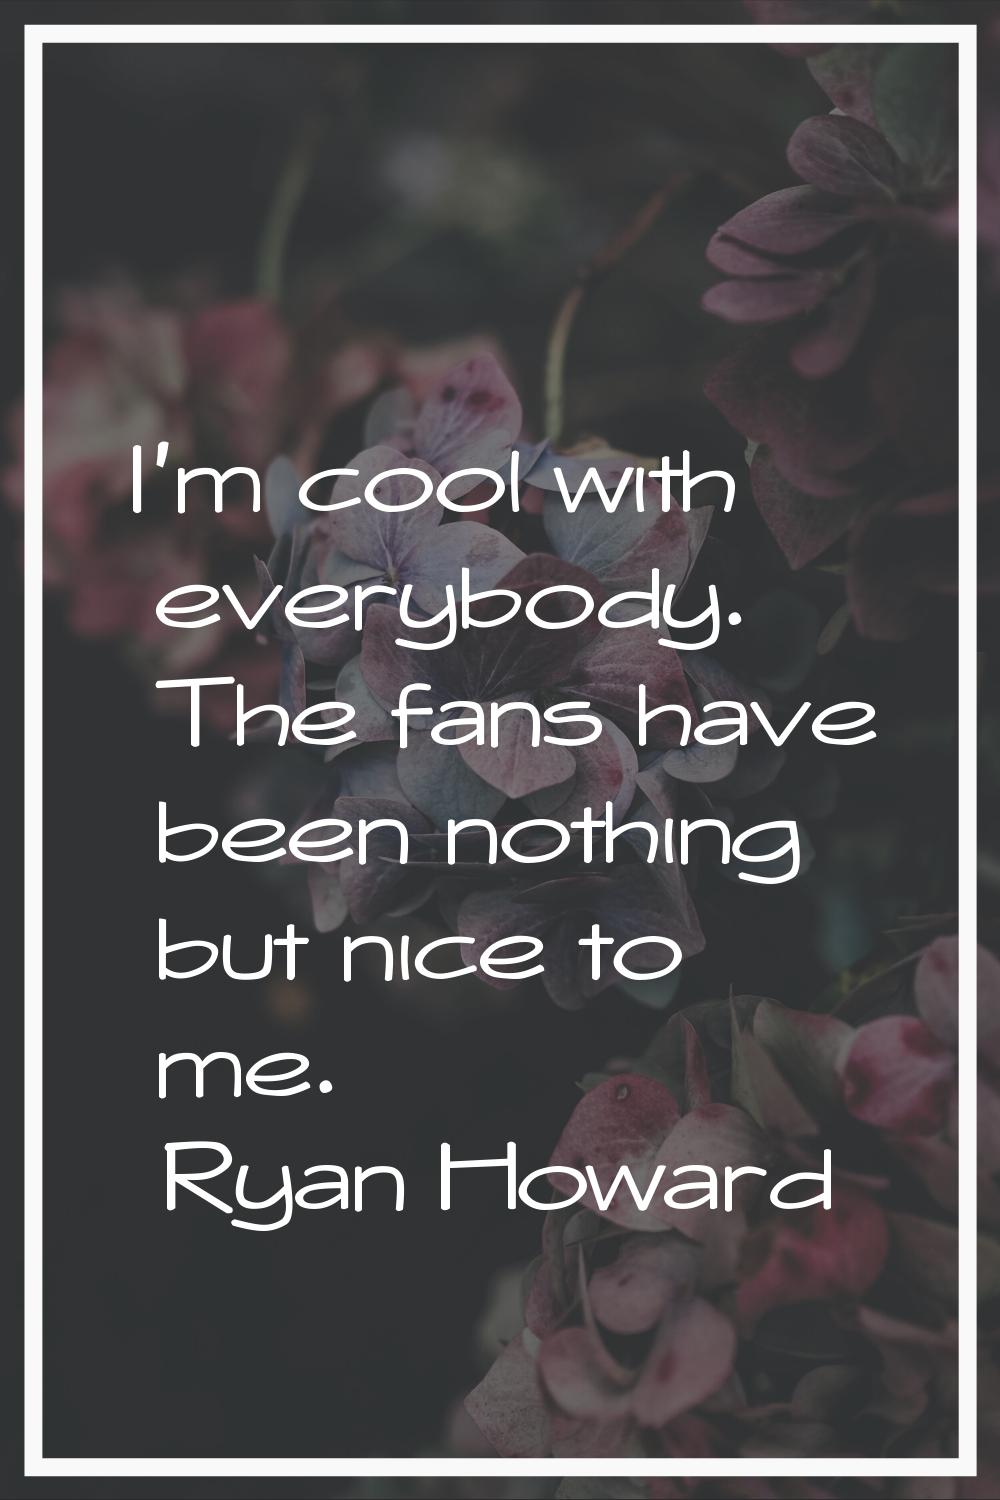 I'm cool with everybody. The fans have been nothing but nice to me.